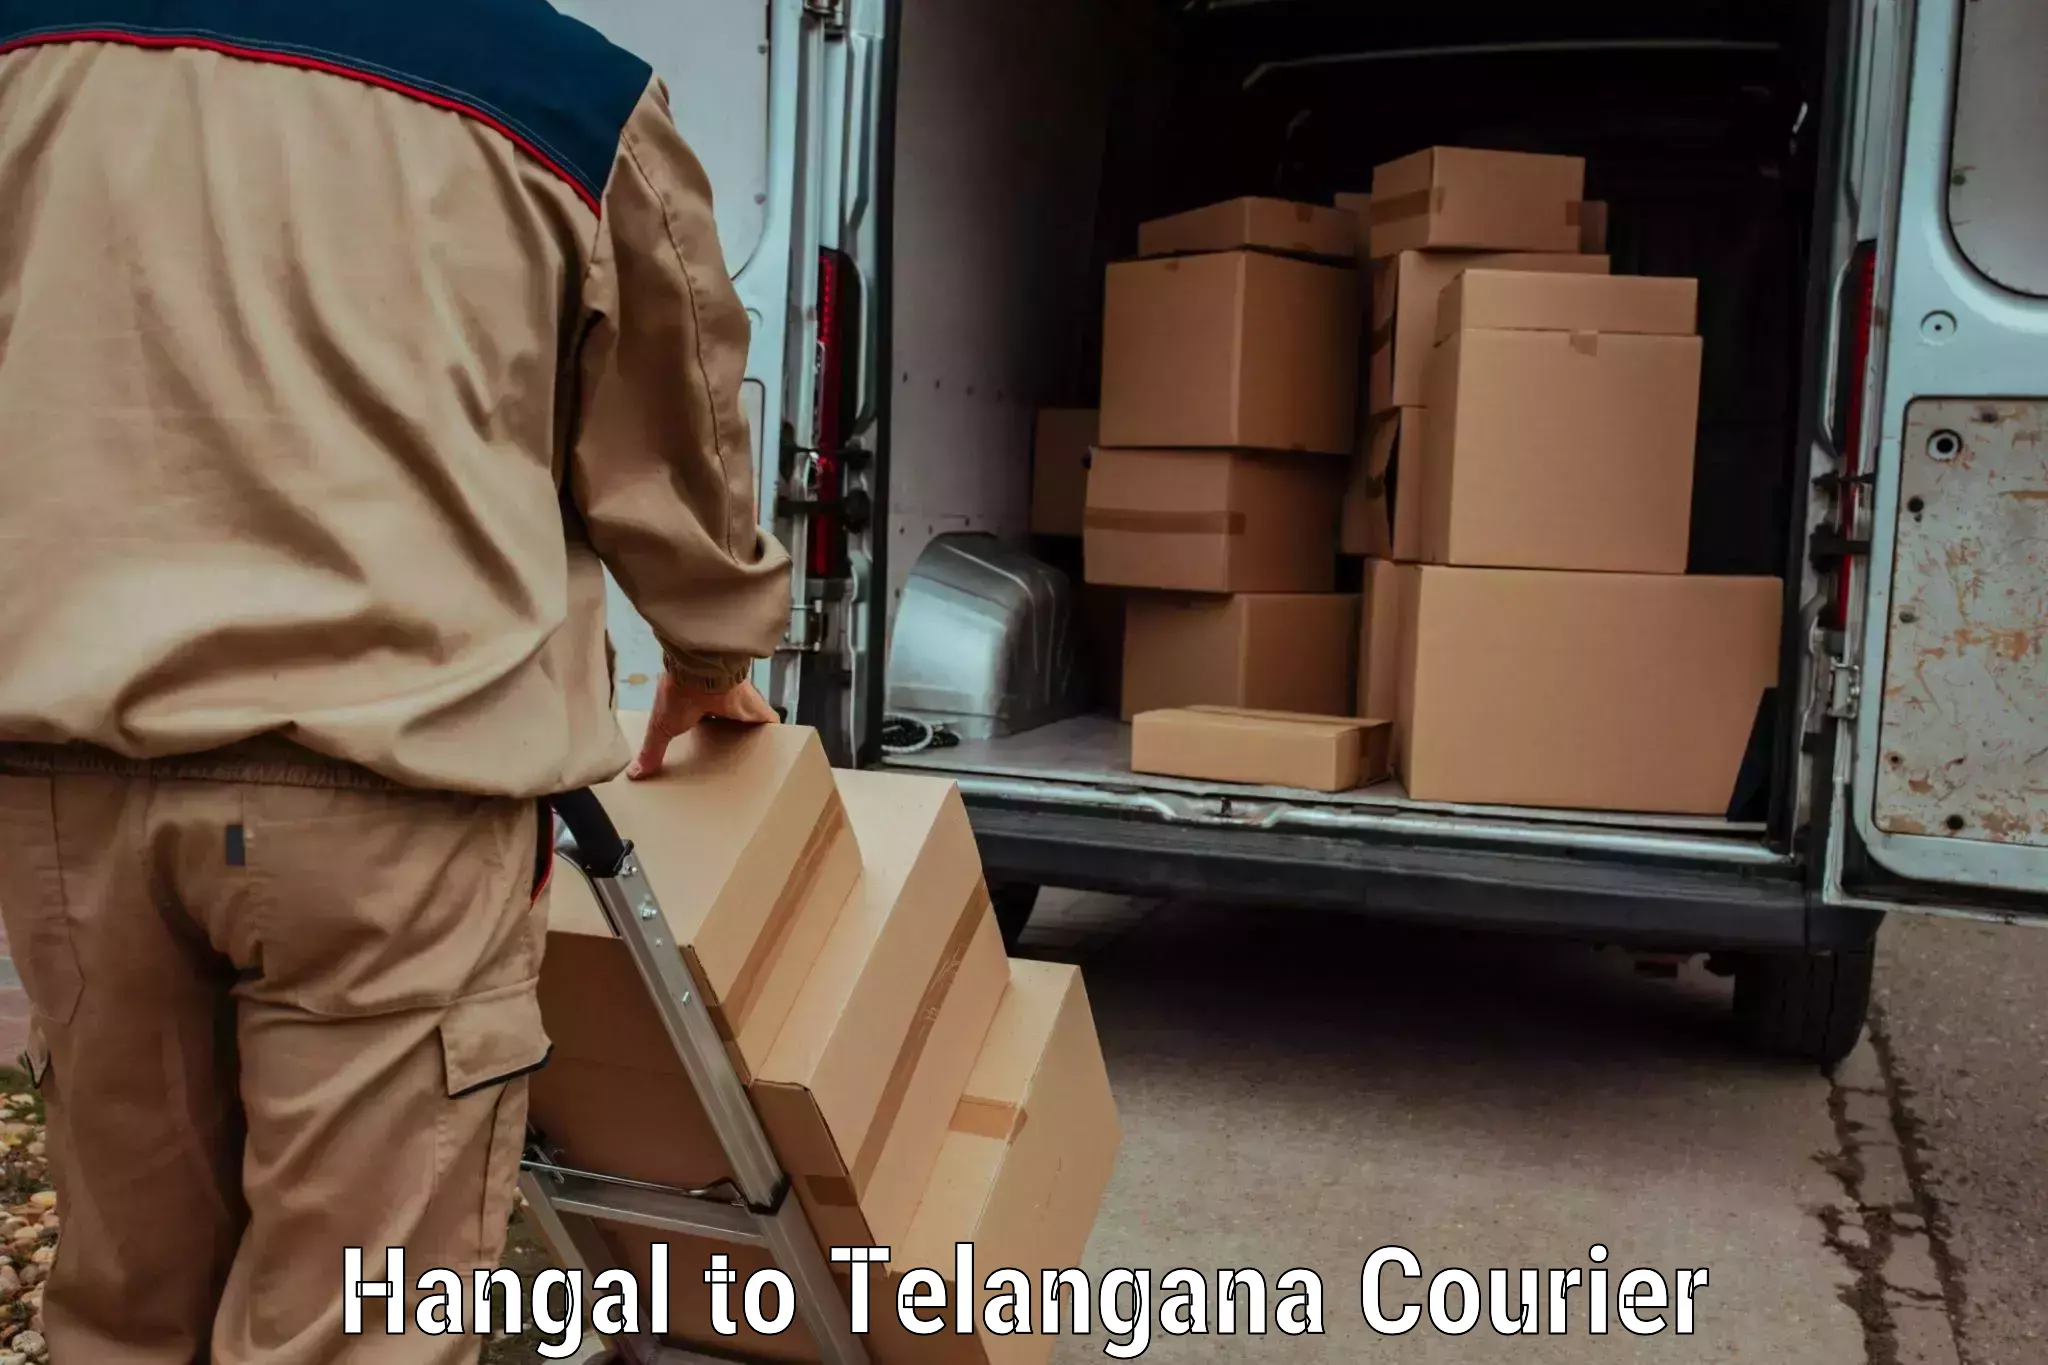 Courier service efficiency Hangal to Manneguda